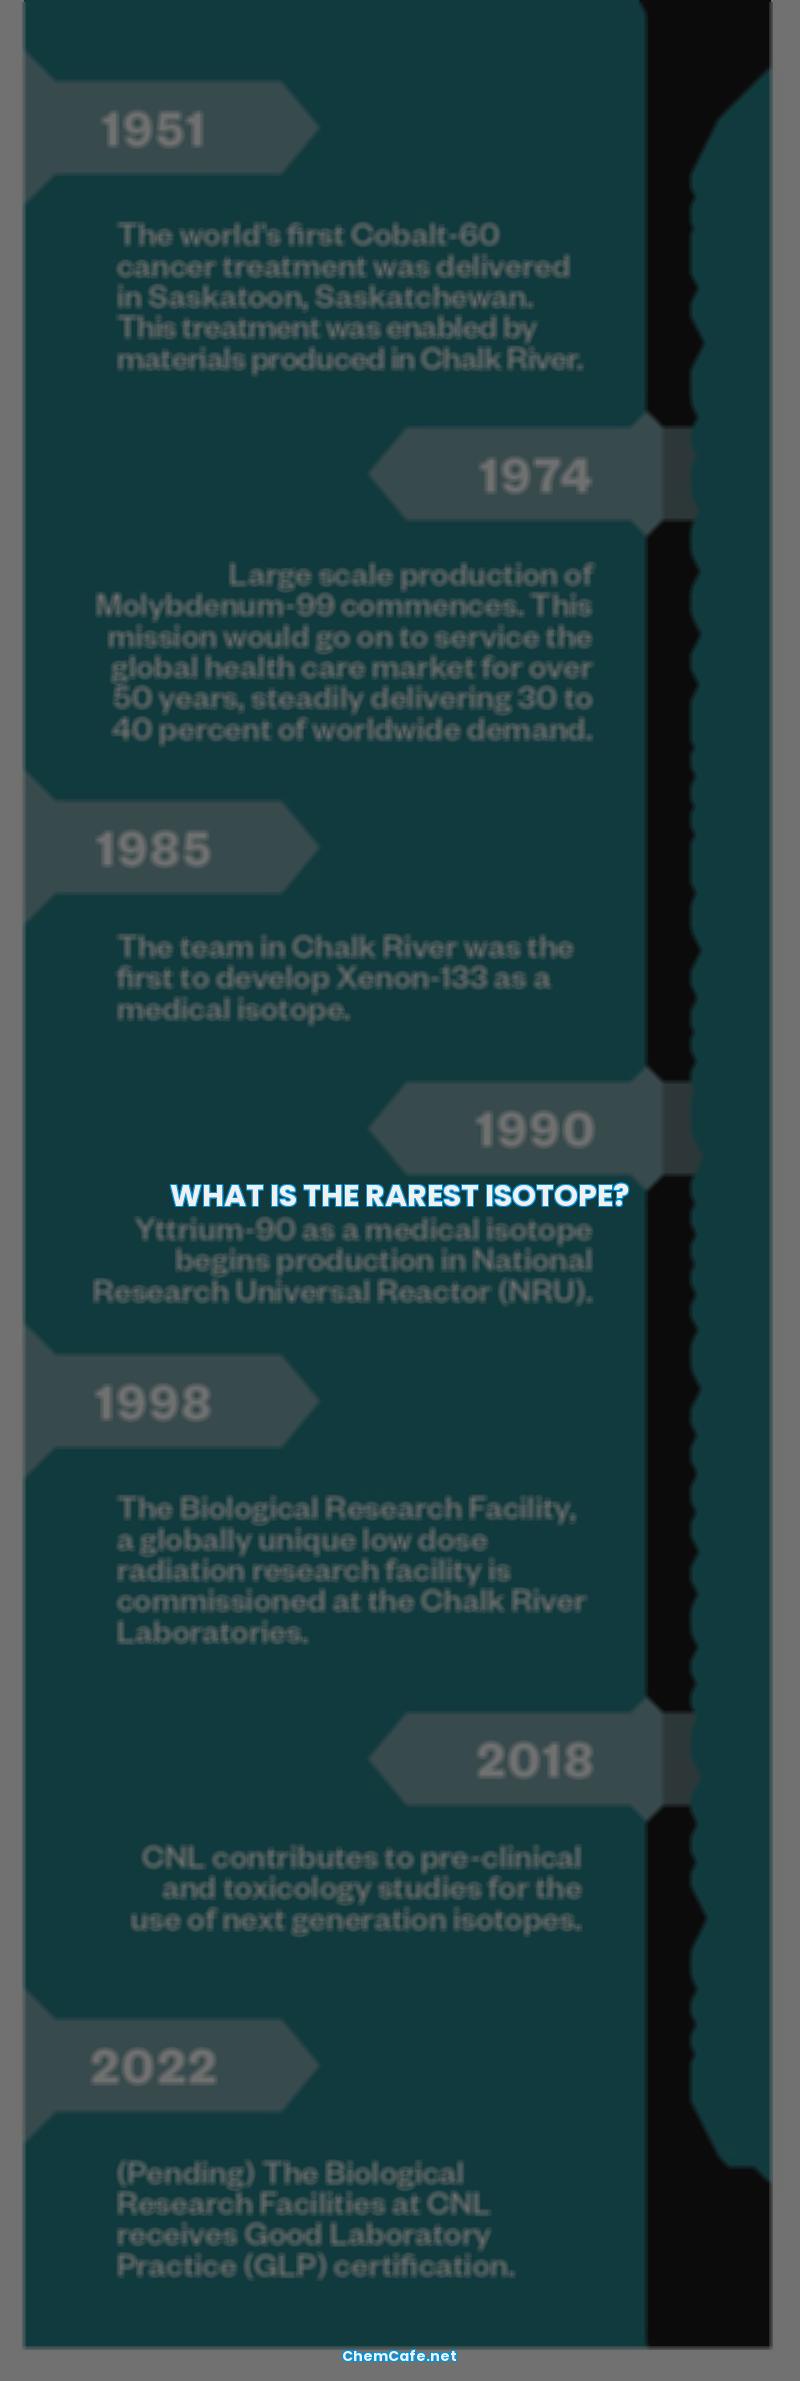 what is the rarest isotope?